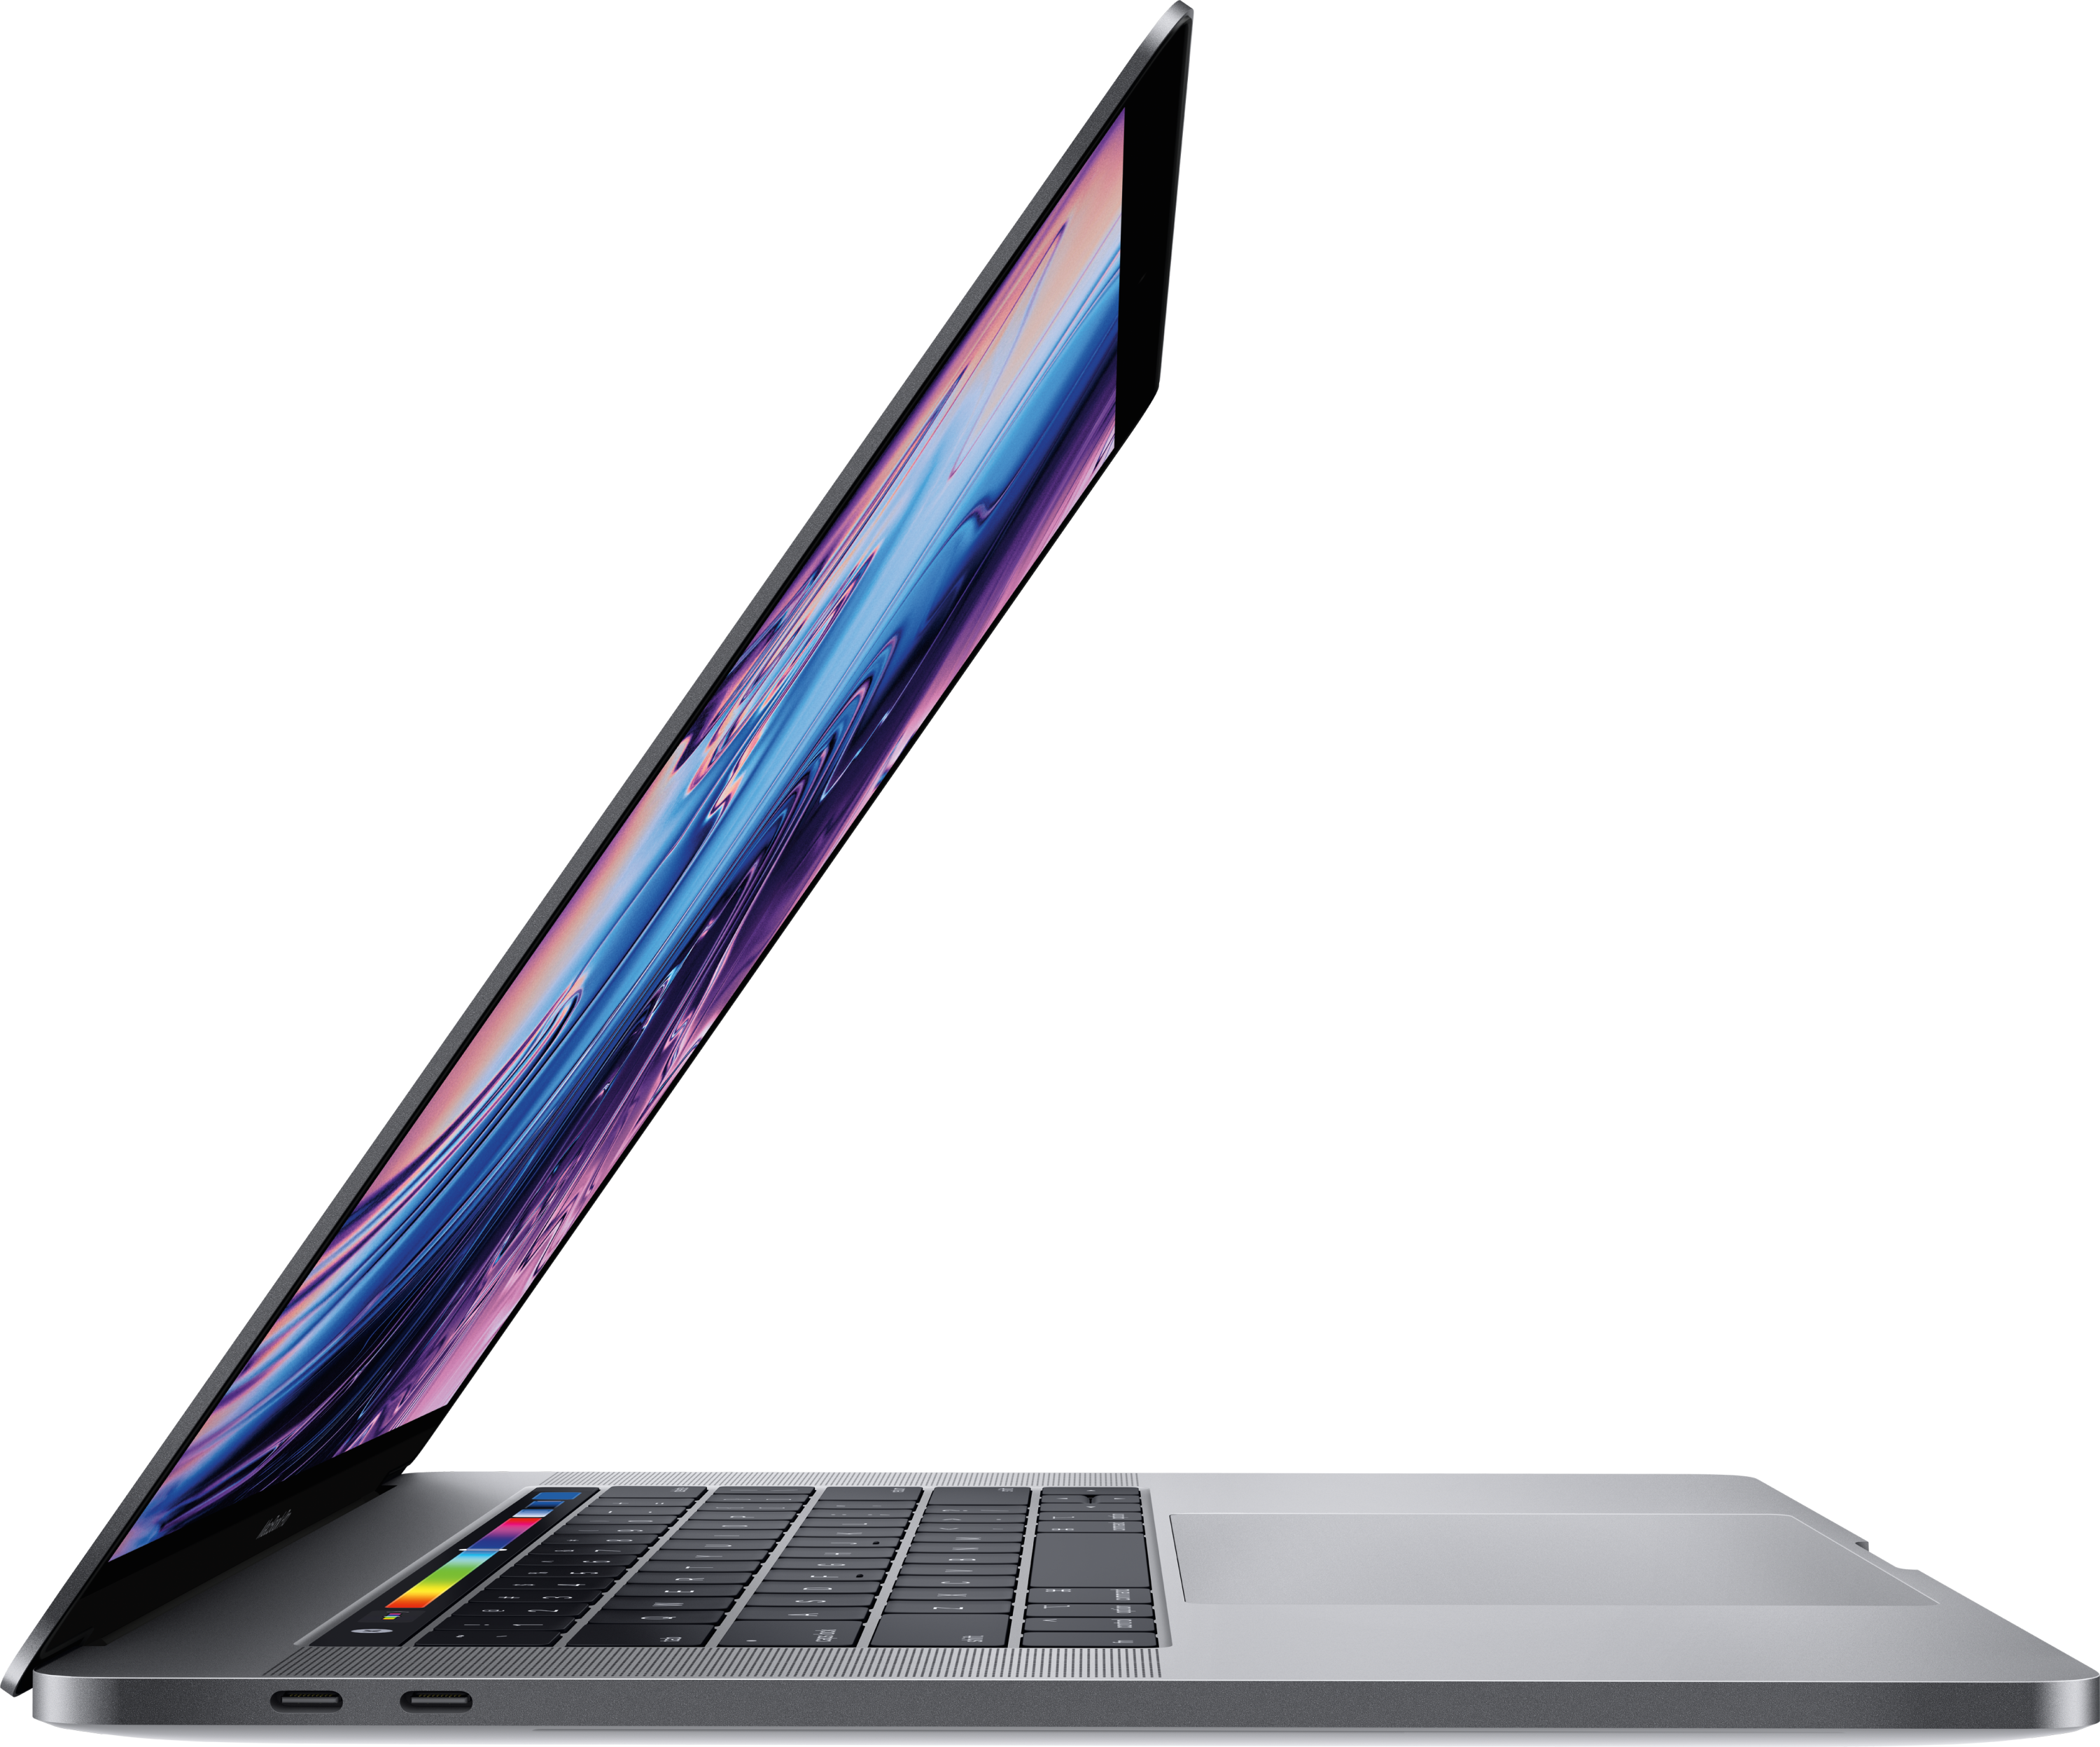 Apple 15-inch MacBook Pro with Touch Bar: 2.6GHz 6-core i7